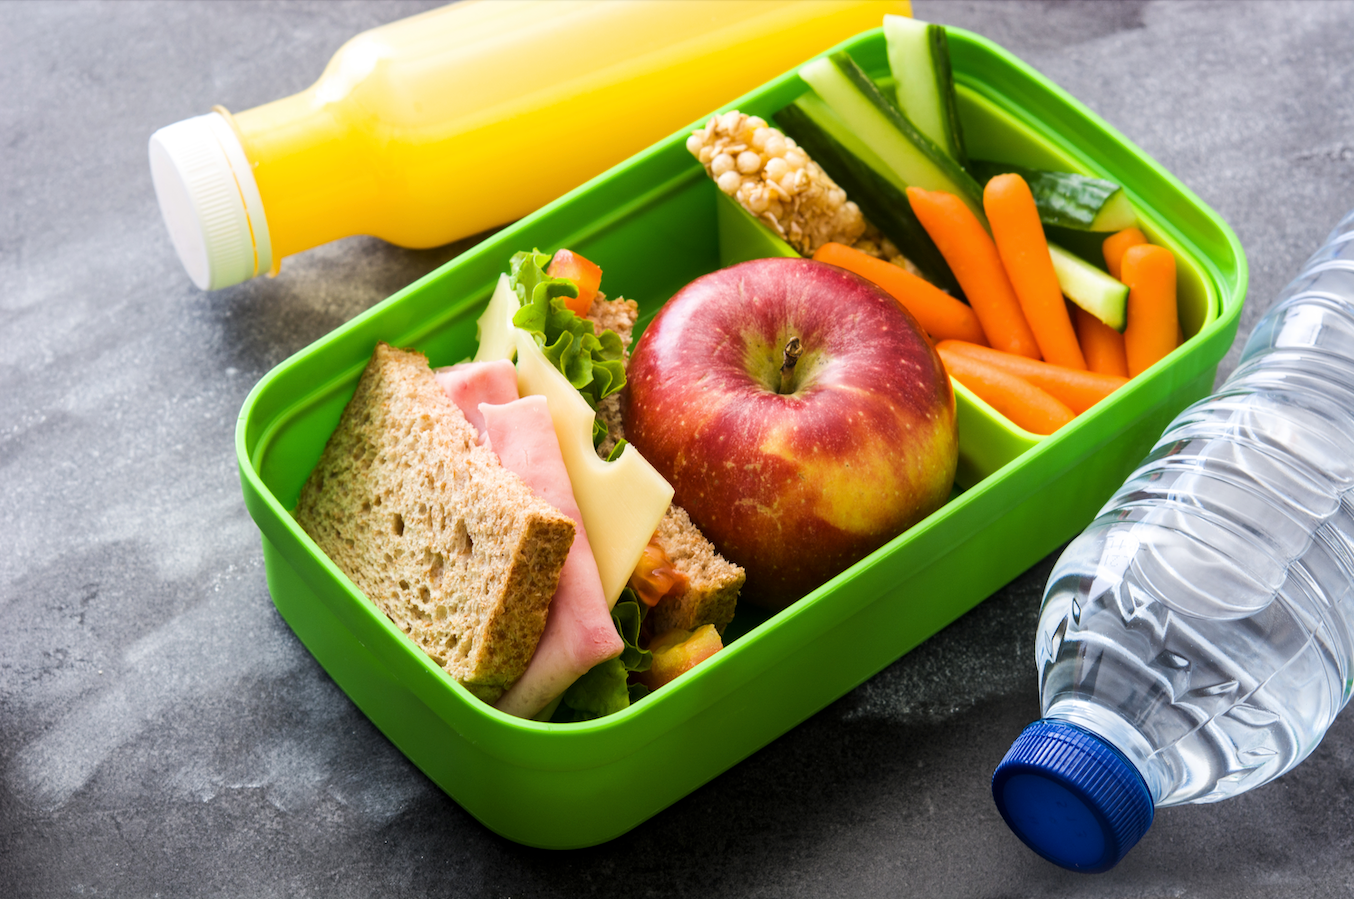 10 Tips and Tricks to Stay Healthy, Fit, and Sane in the Back-to-School Season